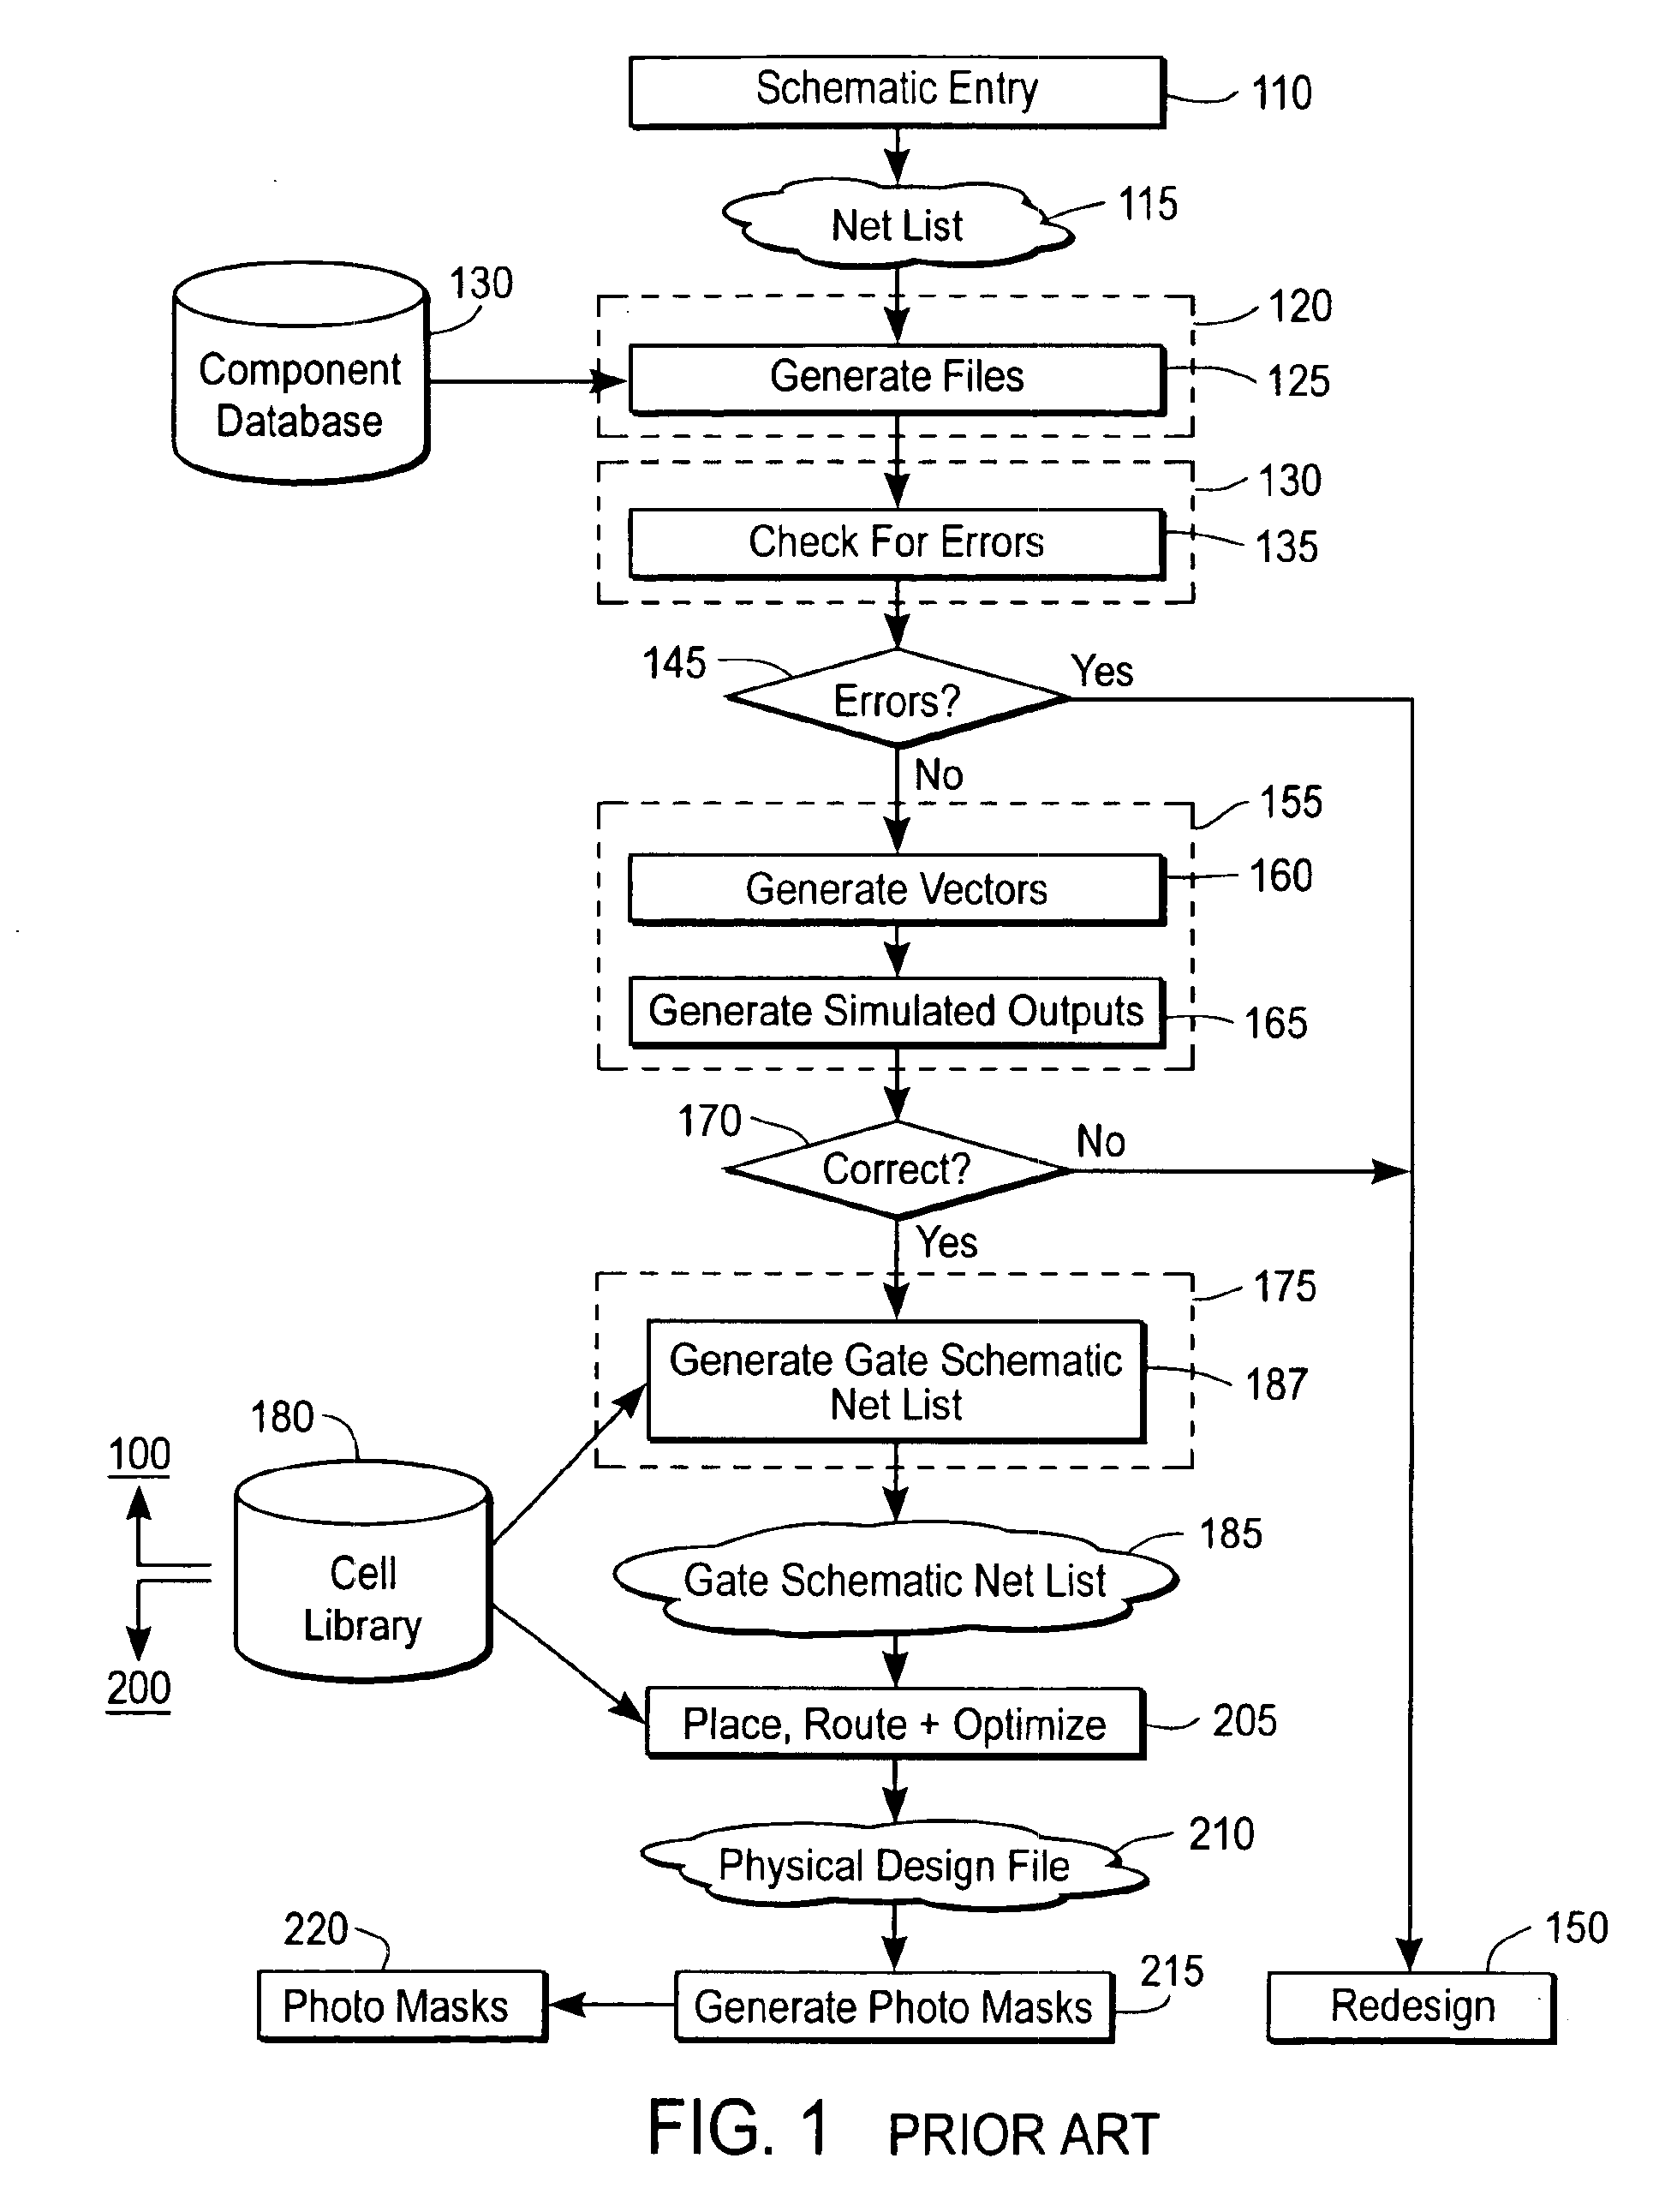 Method for rapid estimation of wire delays and capacitances based on placement of cells